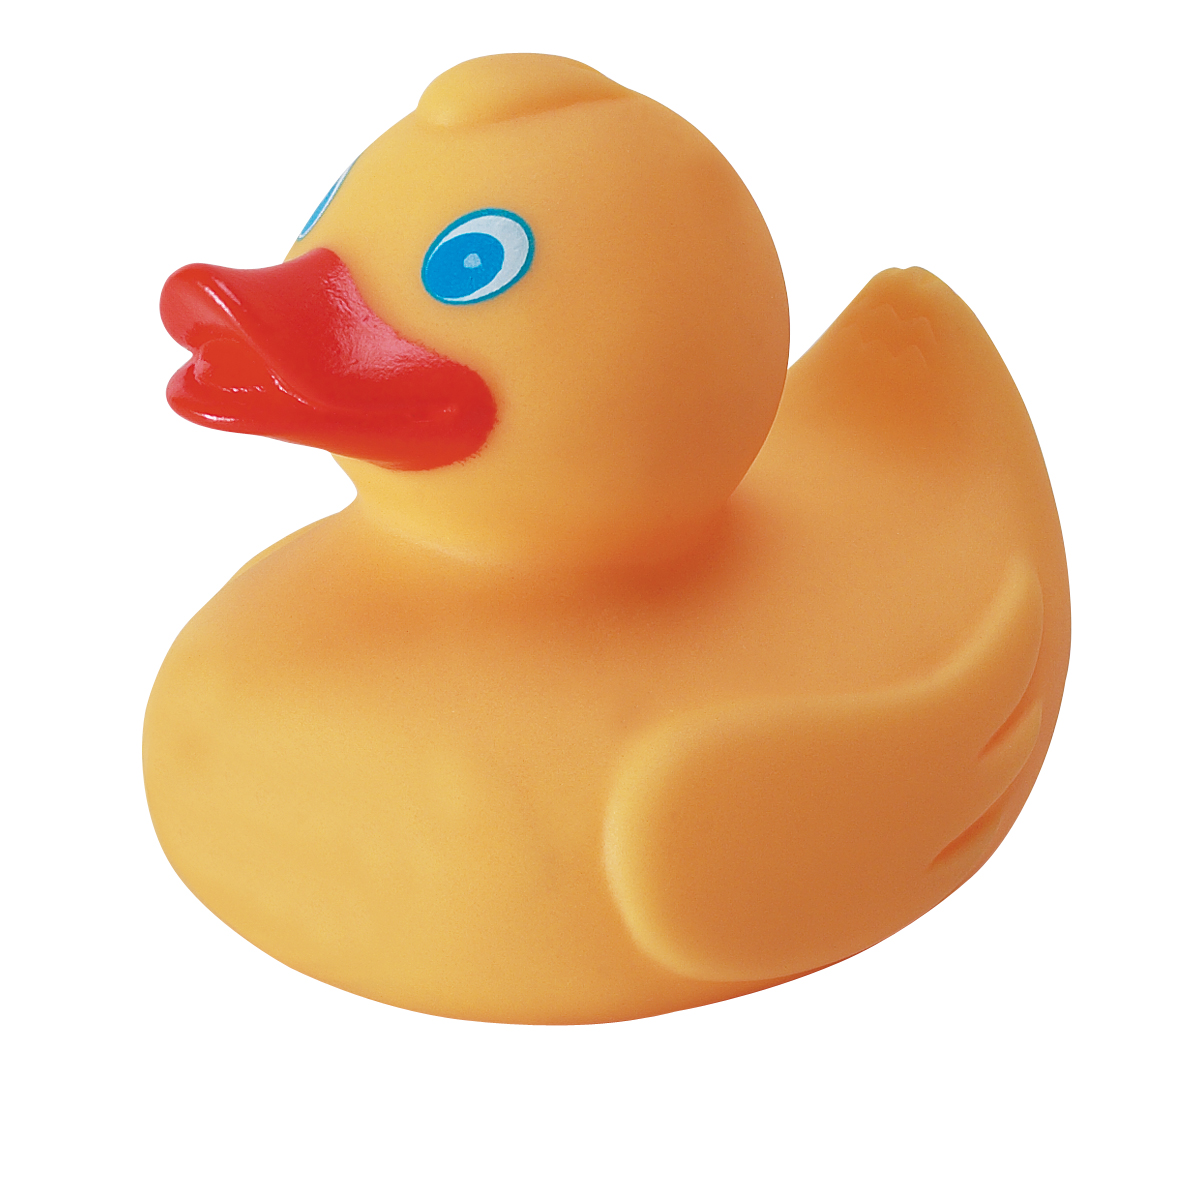 Product Image 4060rubberduck Jpg